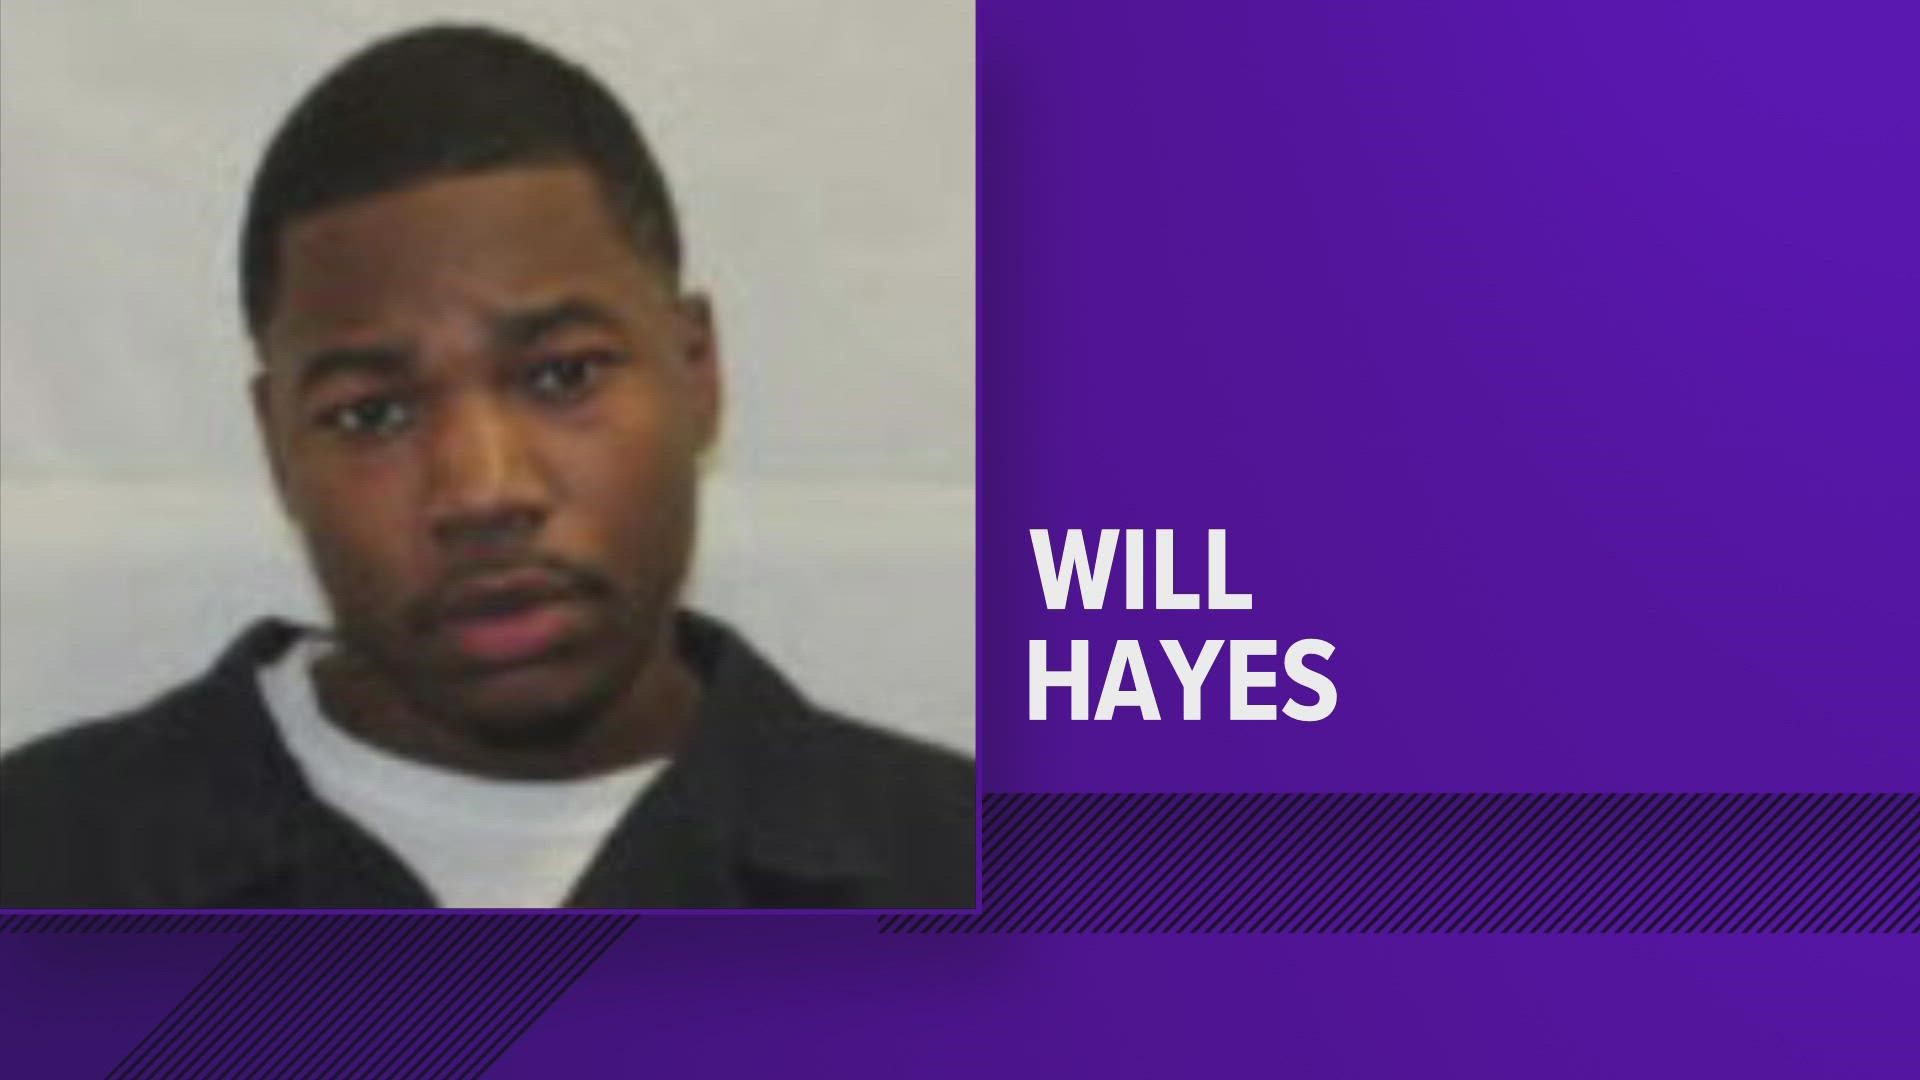 Will Hayes faces several charges including kidnapping and robbery. Police are still searching for the second suspect.